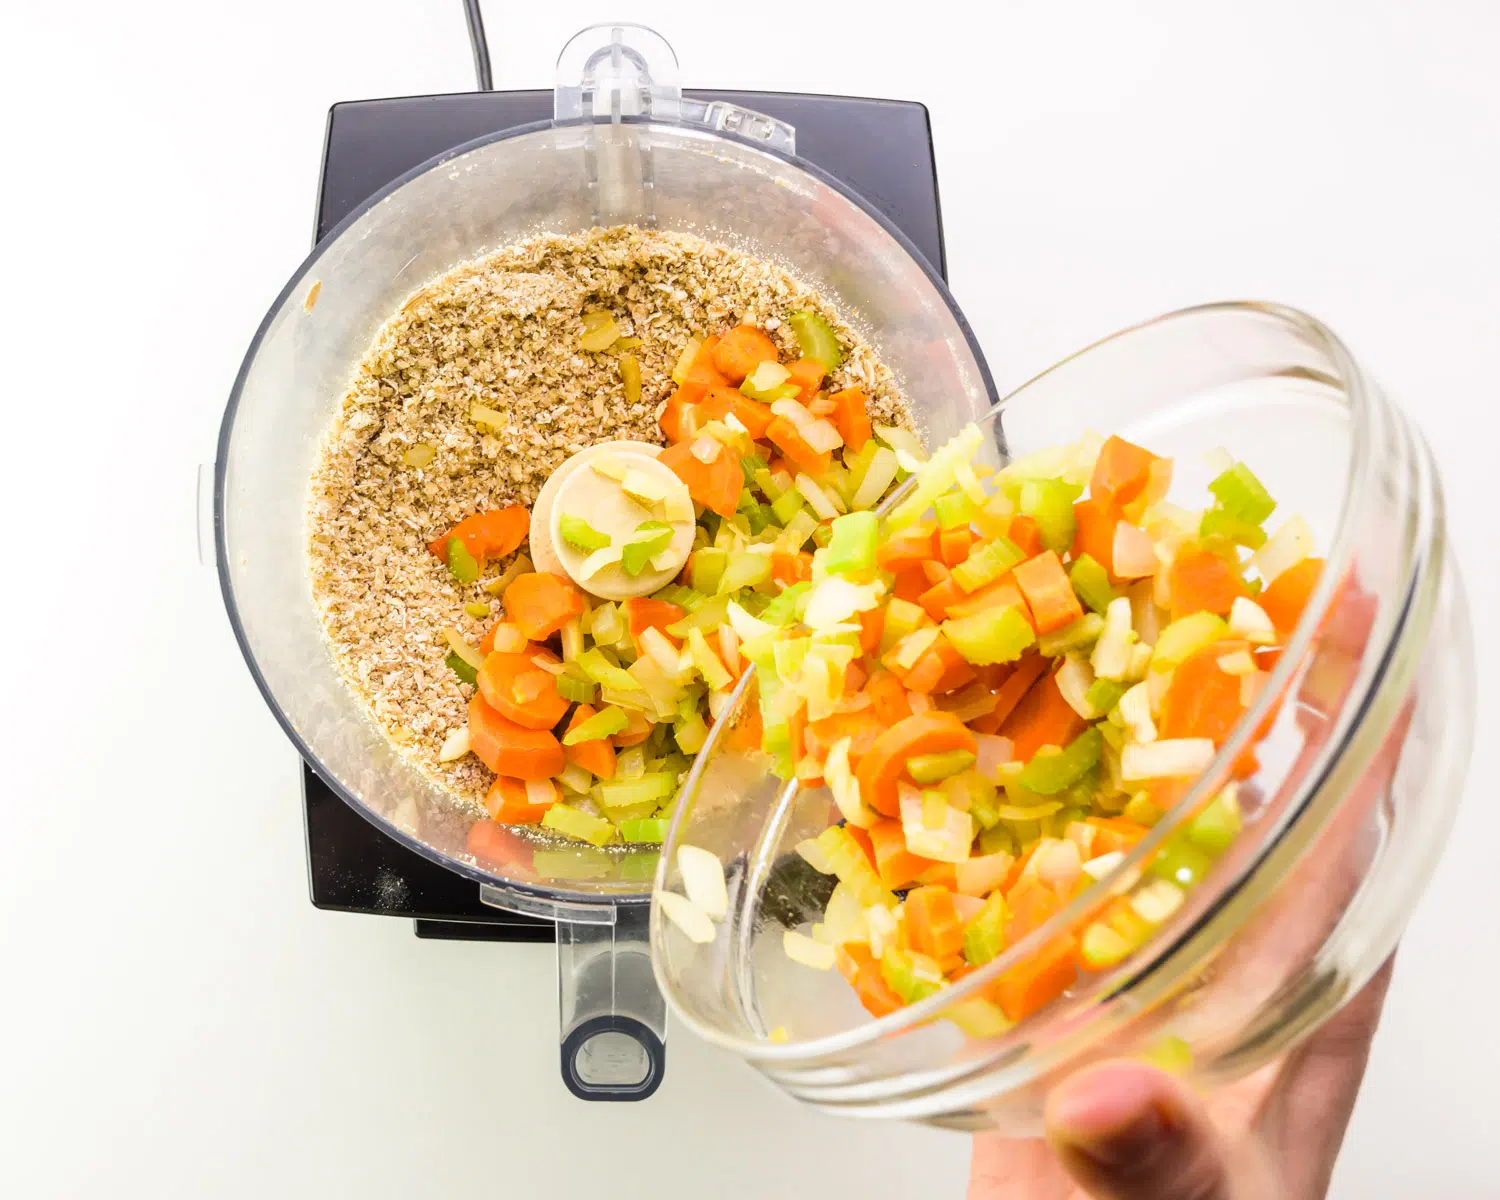 Cooked vegetables are being added to a food processor with other ingredients.